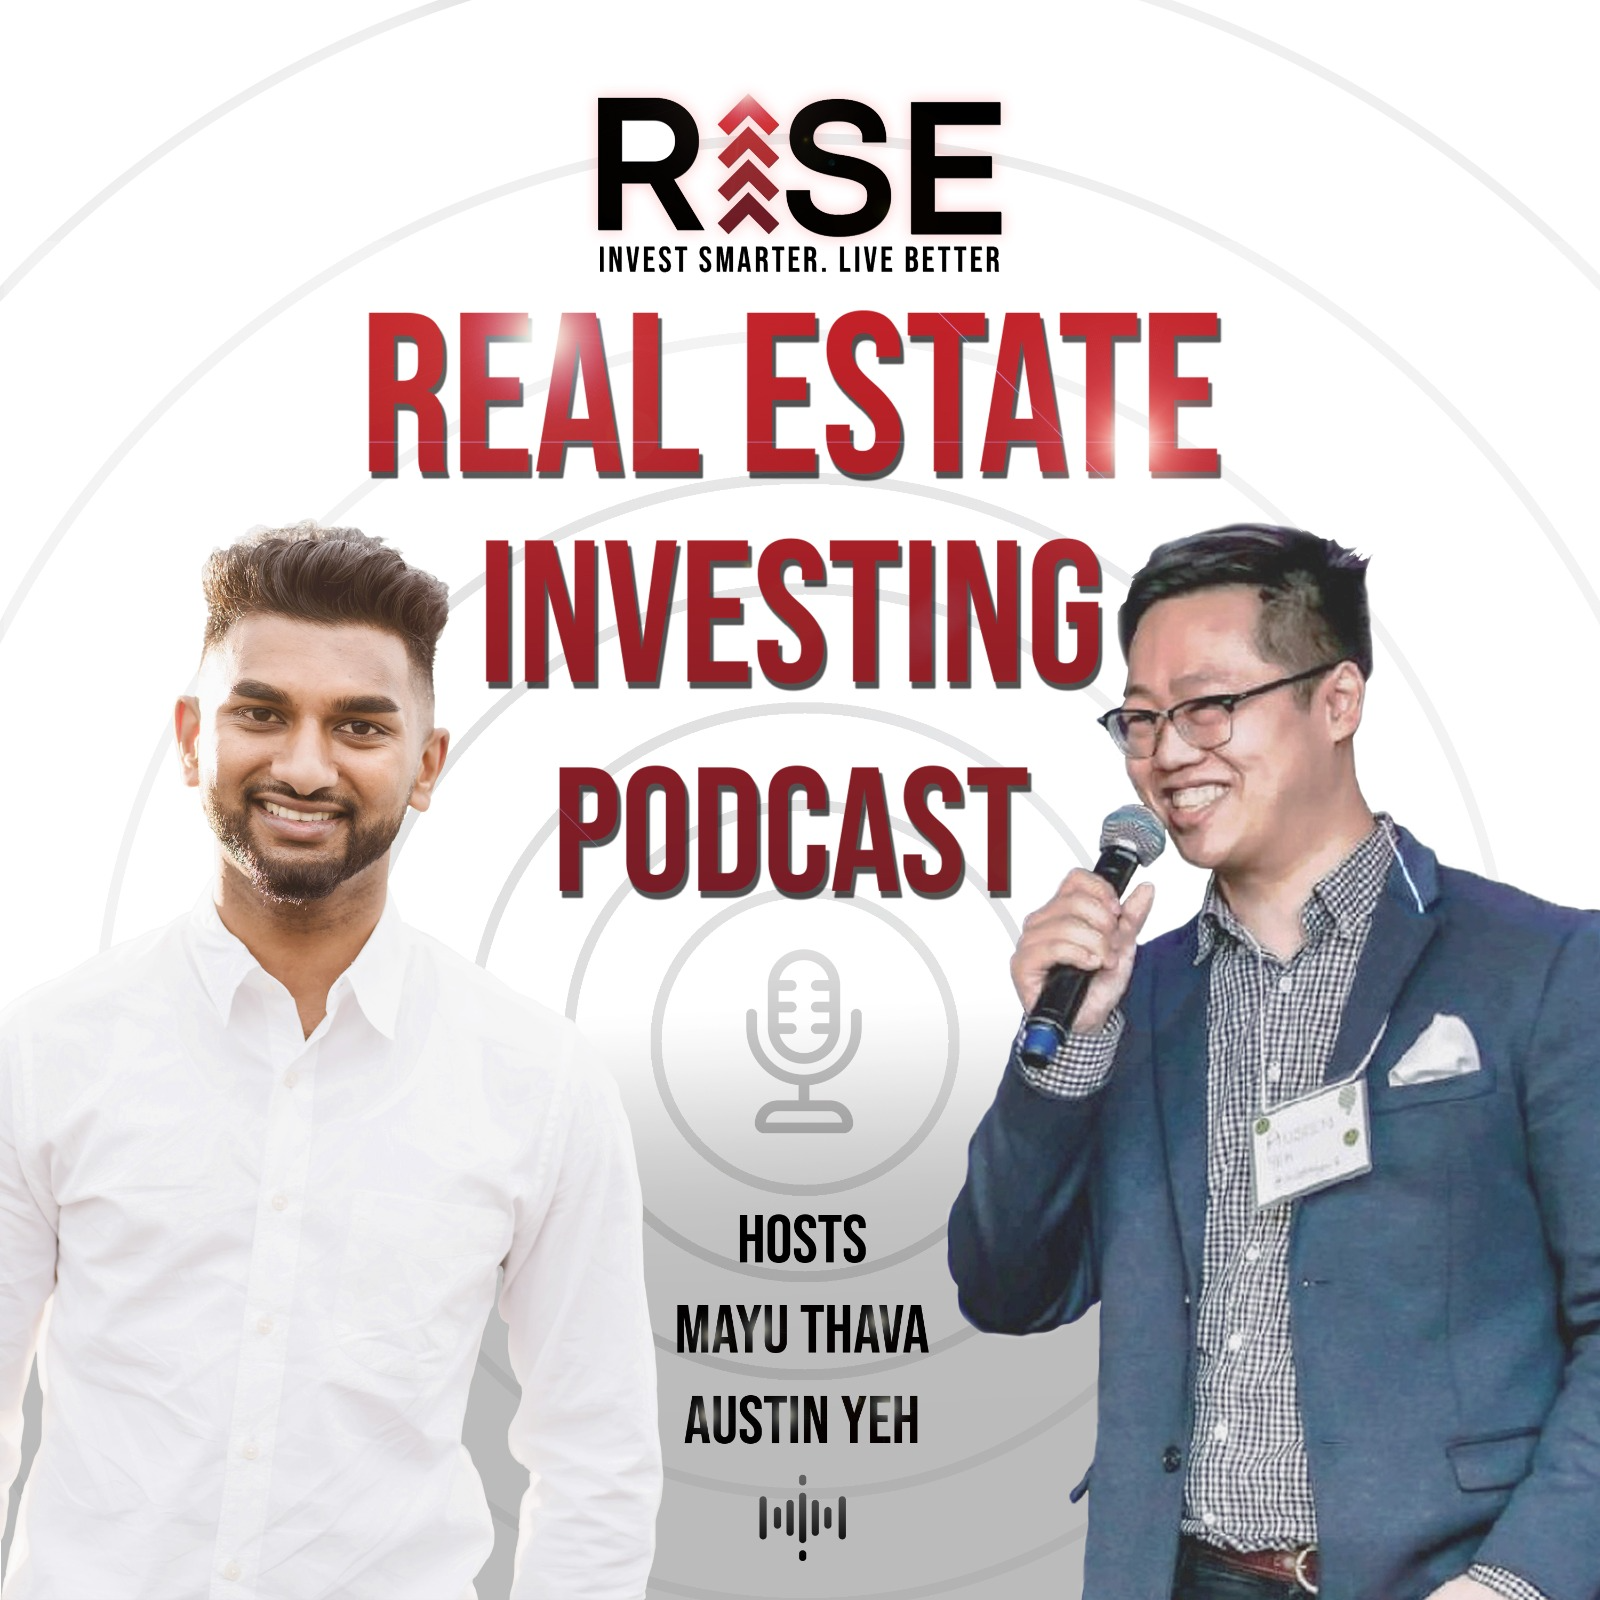 Rise Investment Podcast